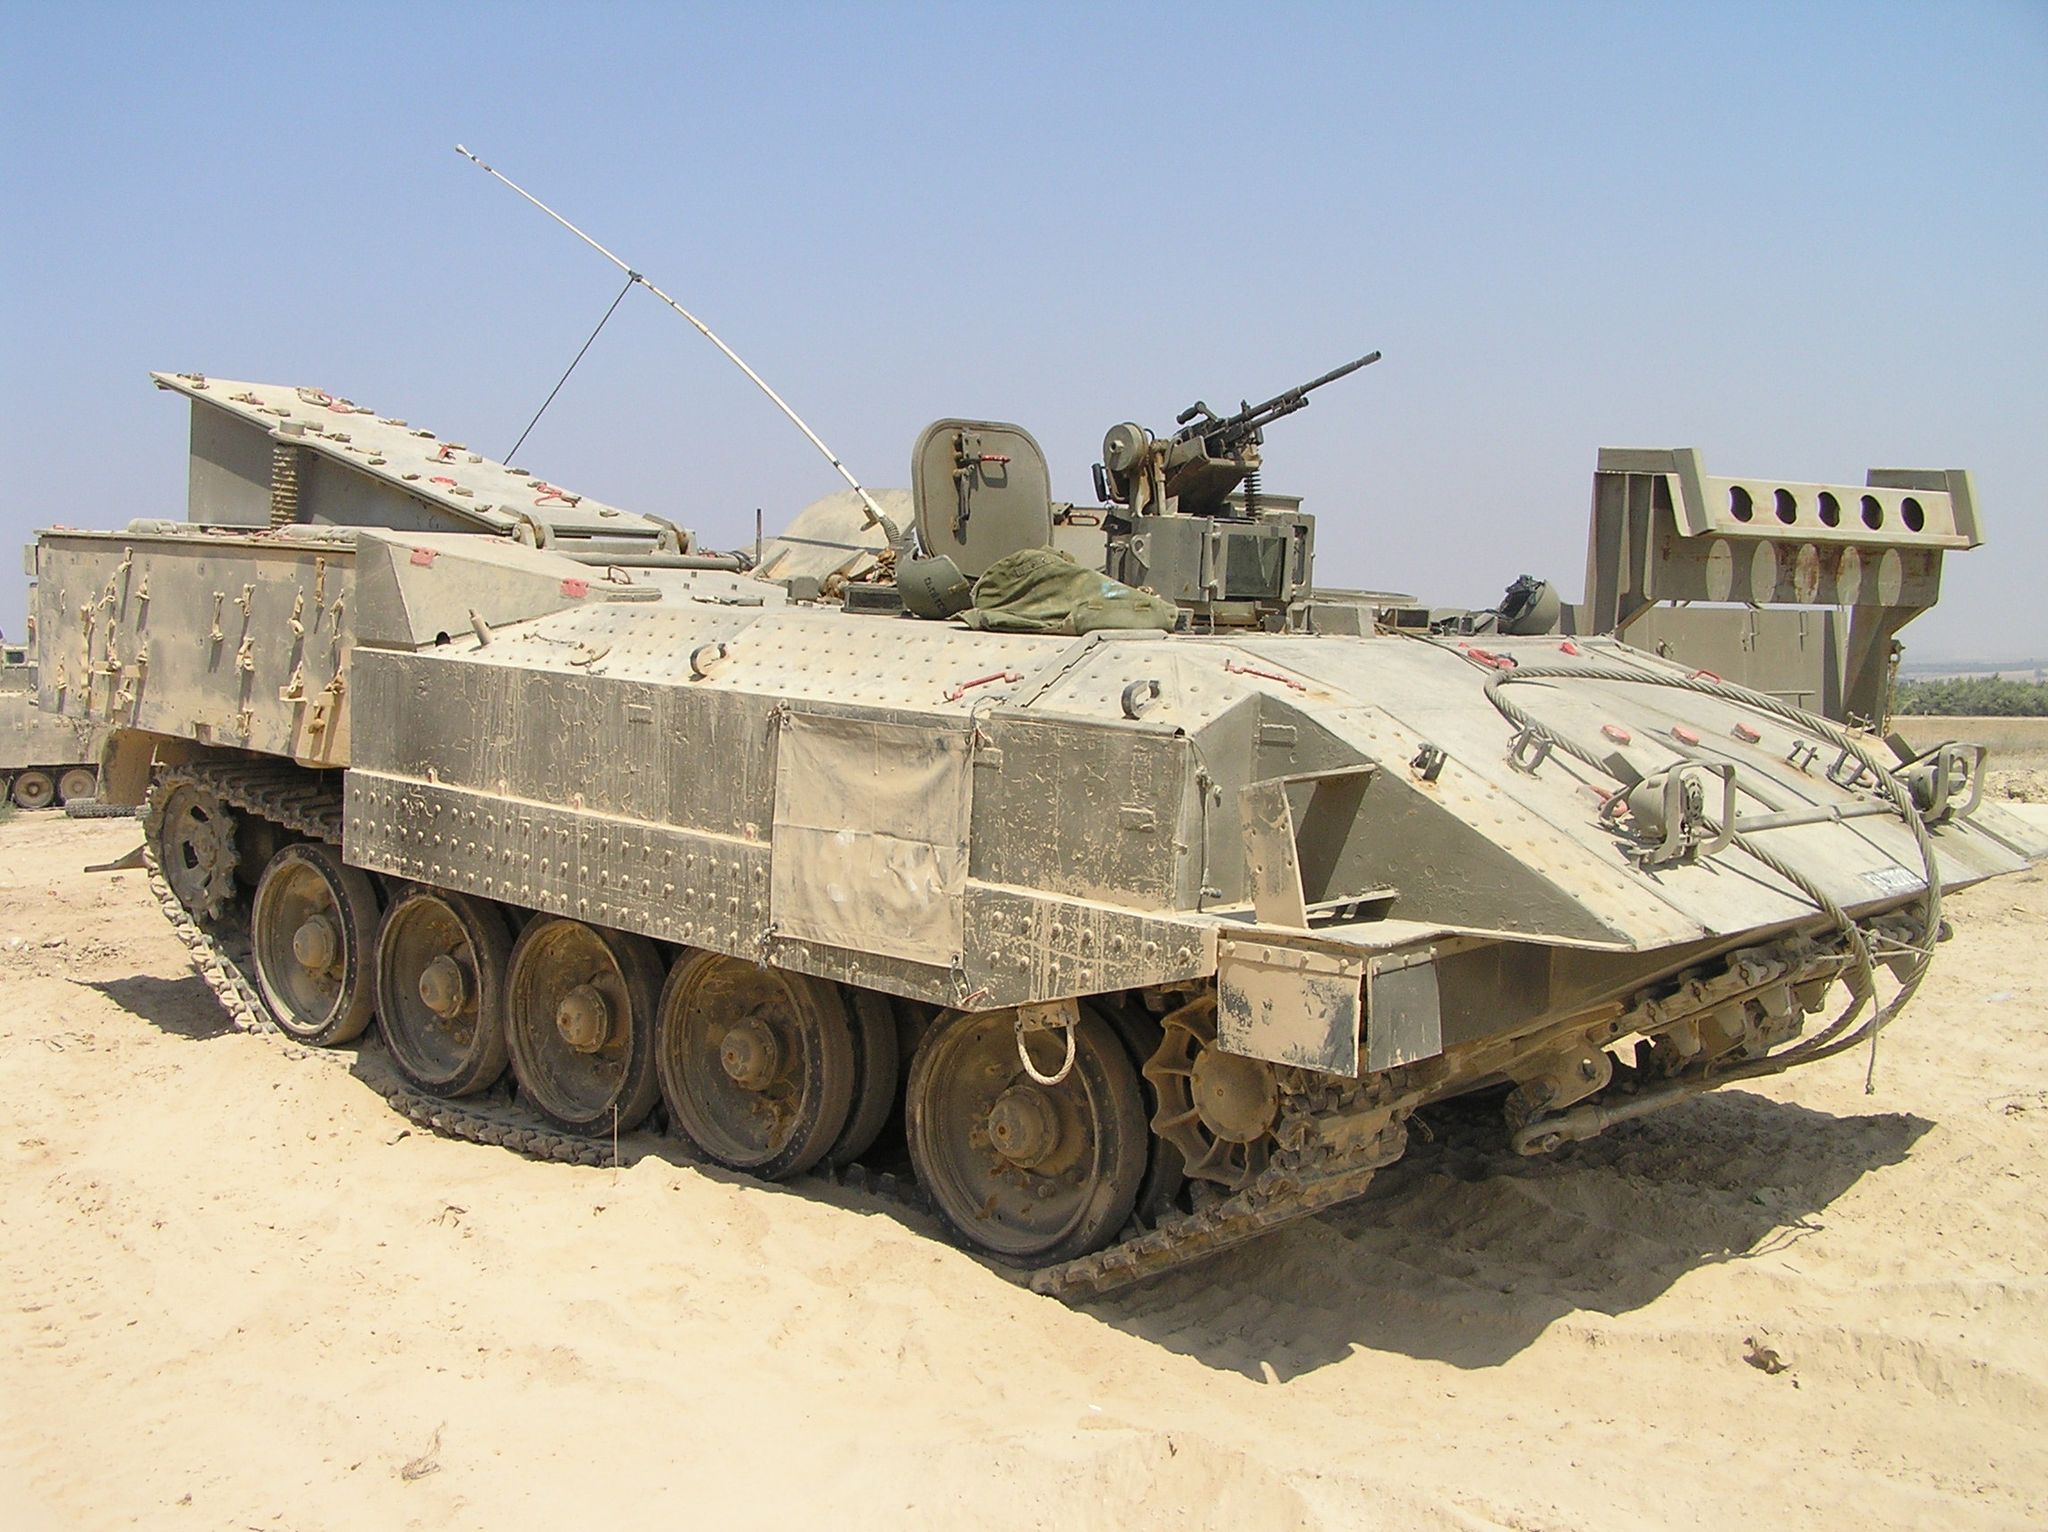 a military tank in the desert